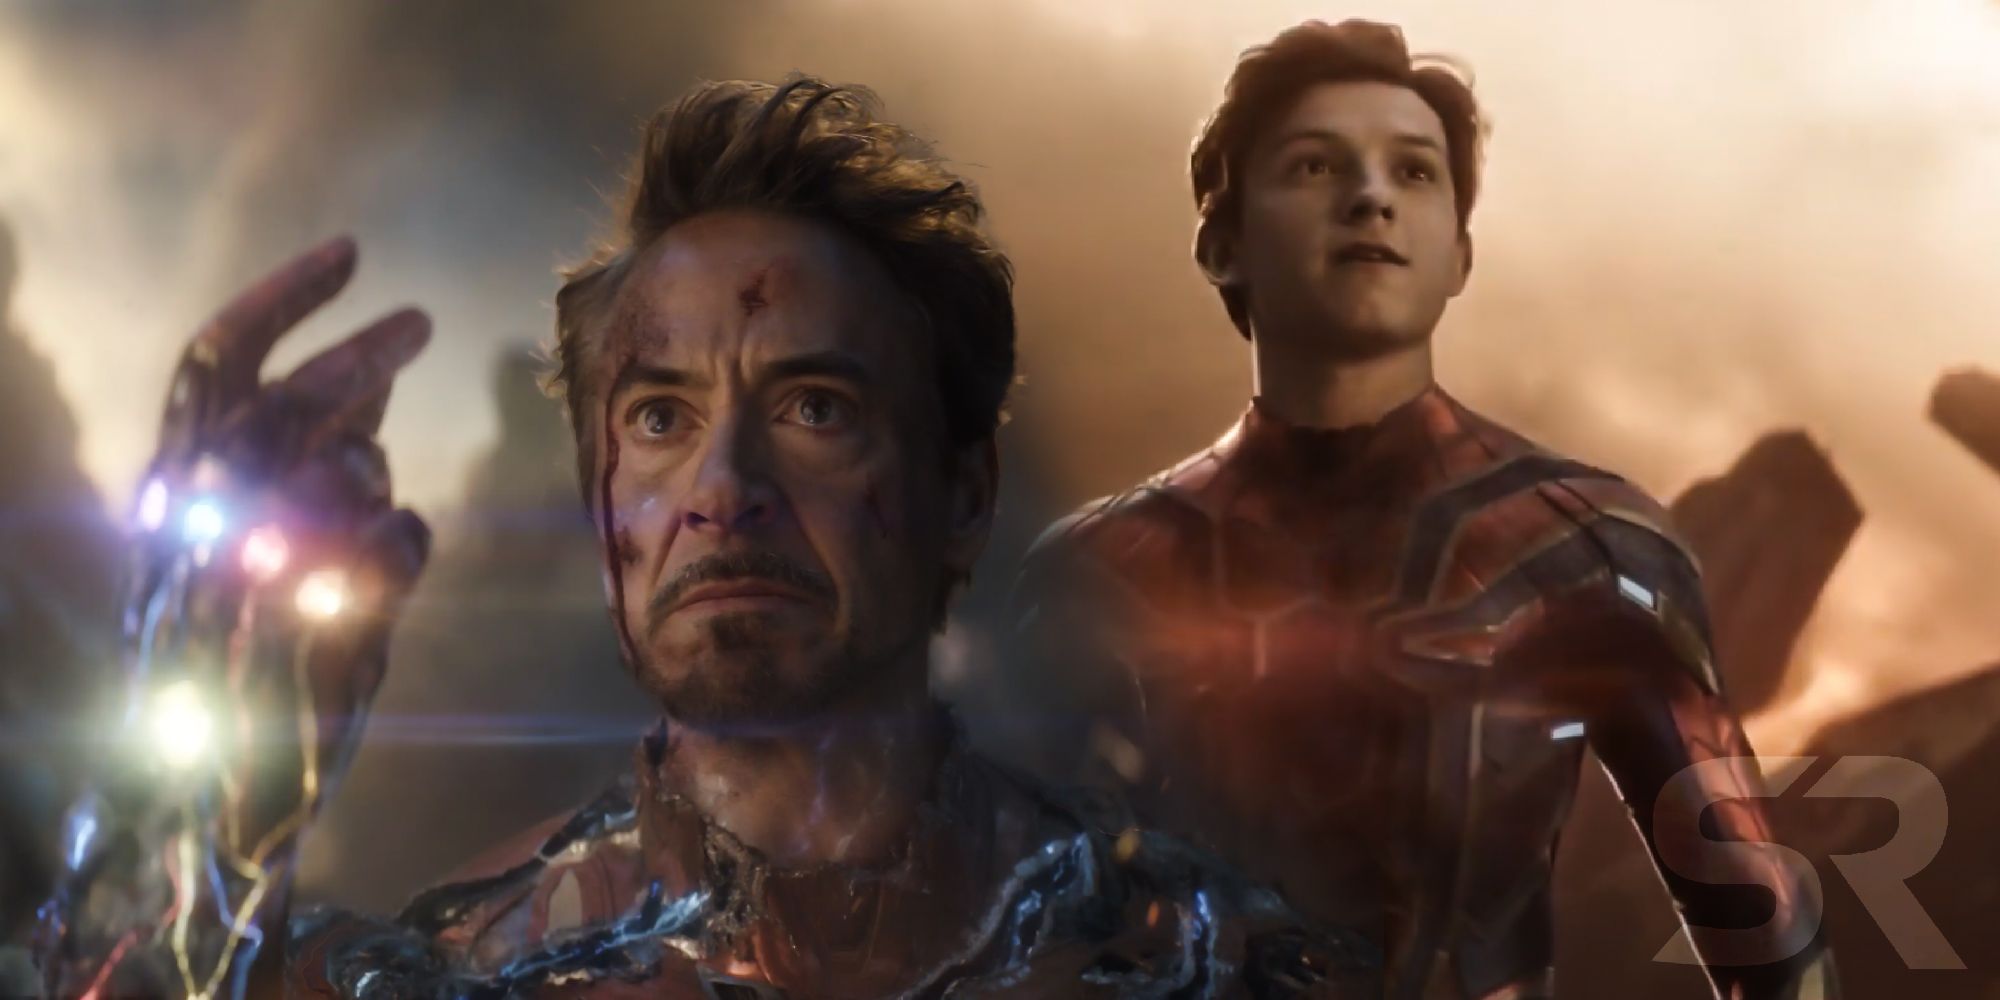 Robert Downey Jr and Tom Holland as Iron man and Spiderman in Avengers Endgame